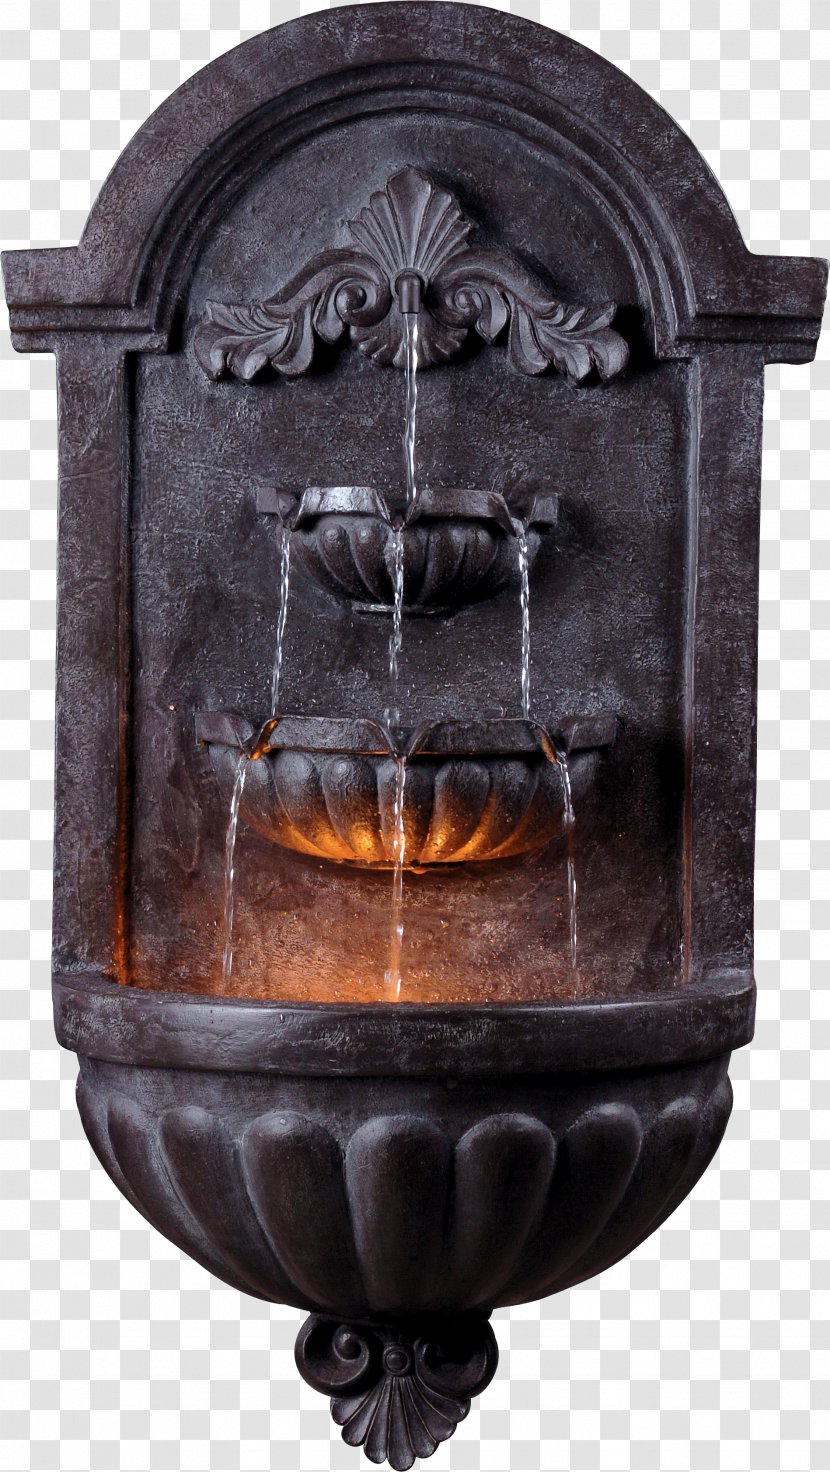 Fountain Garden Wall Water Feature Landscape Lighting - Landscaping Transparent PNG